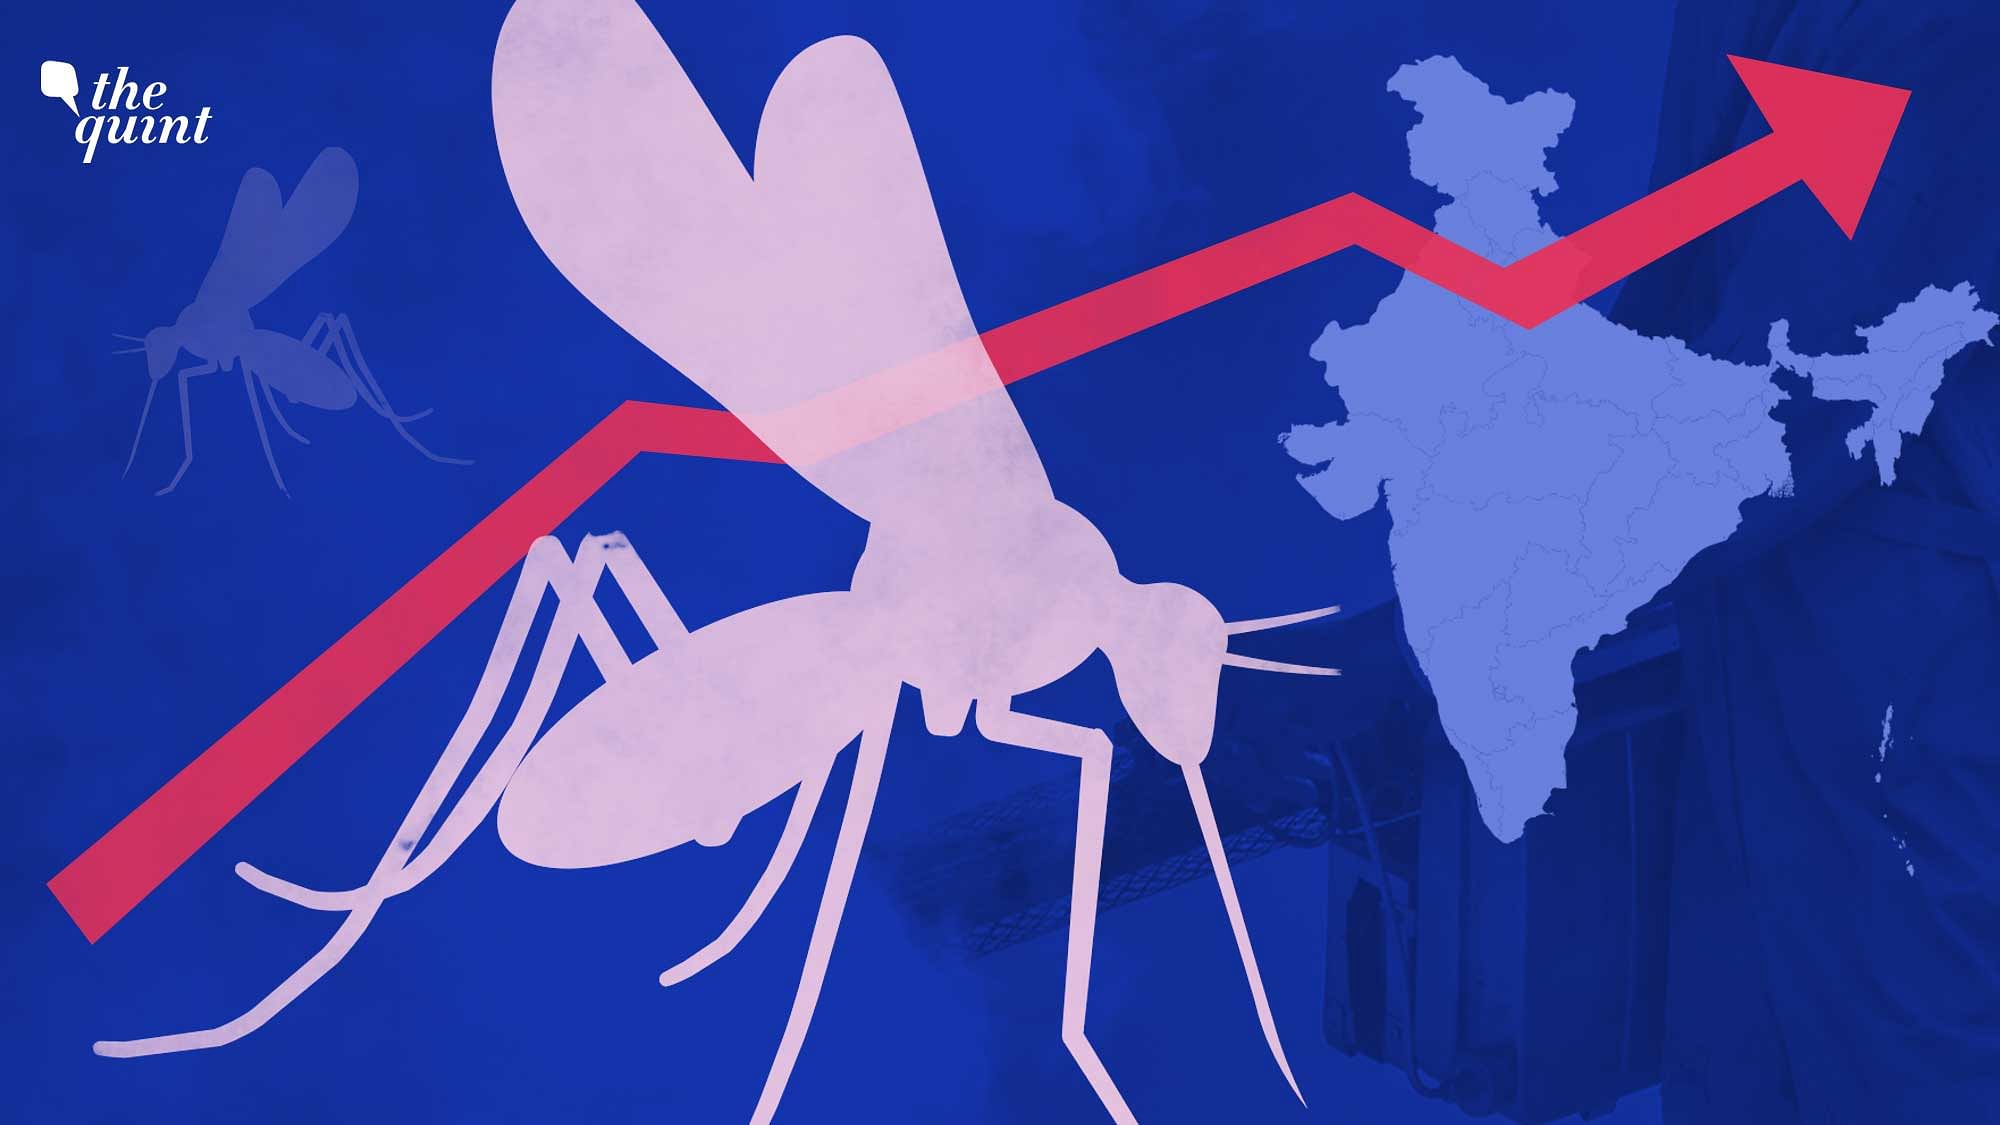 Dengue Outbreak in Delhi & Elsewhere What Factors Have Led to Rise in